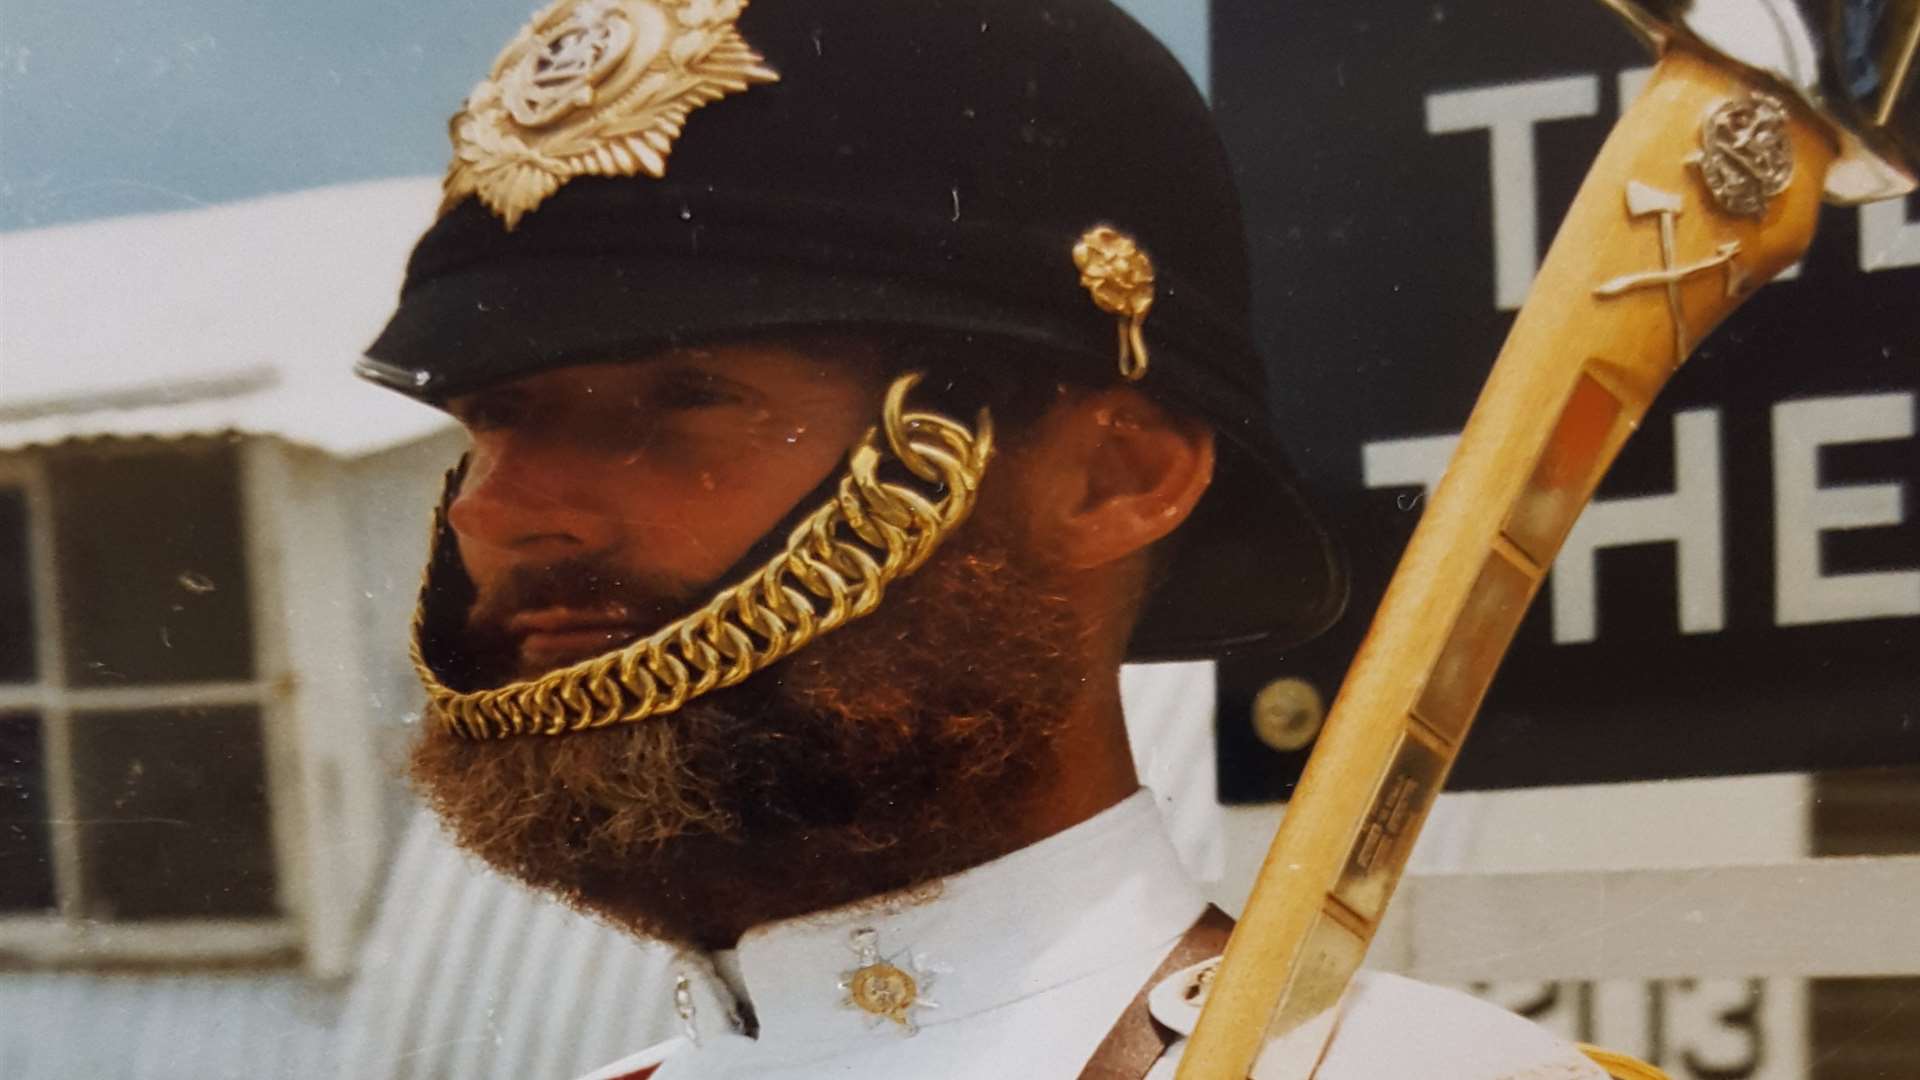 Blue Cooper during his service years in full ceremonial uniform